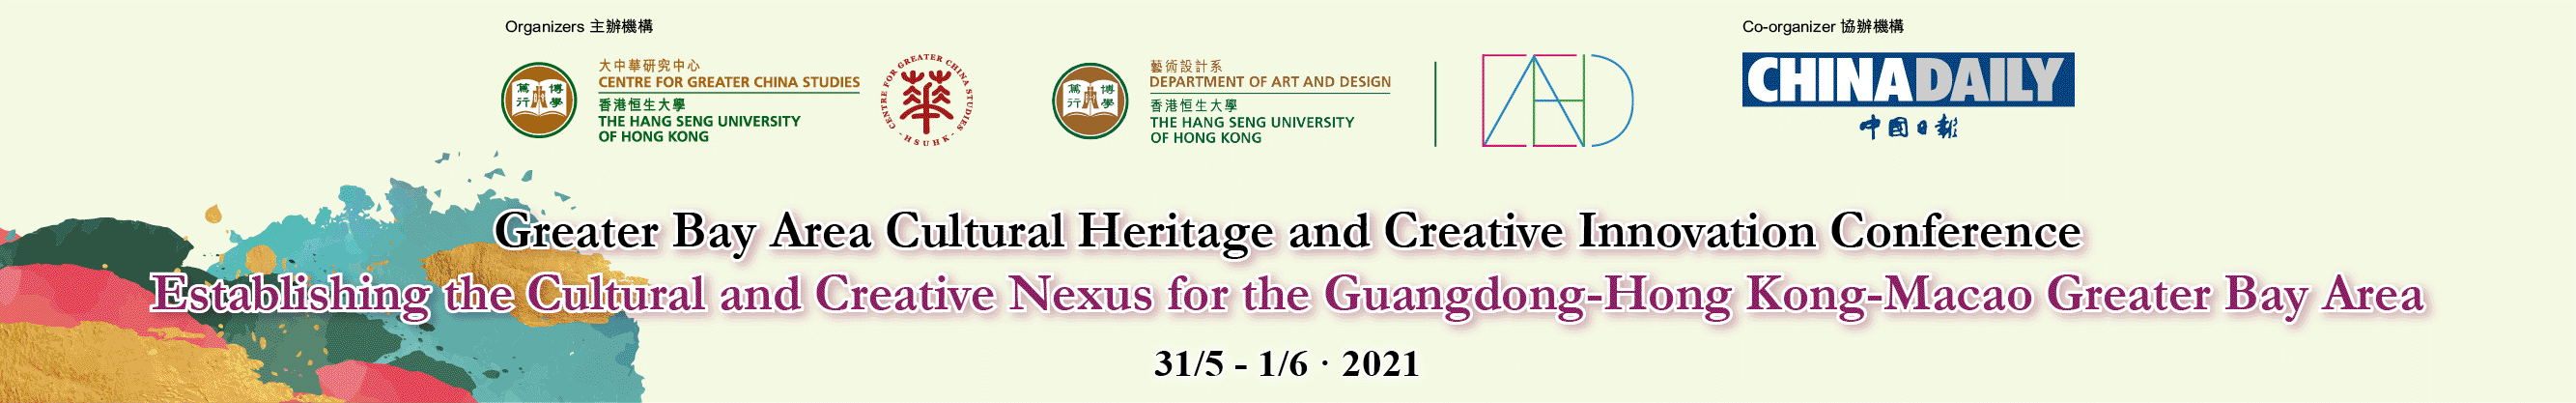 Greater Bay Area Cultural Heritage and Creative Innovation Conference